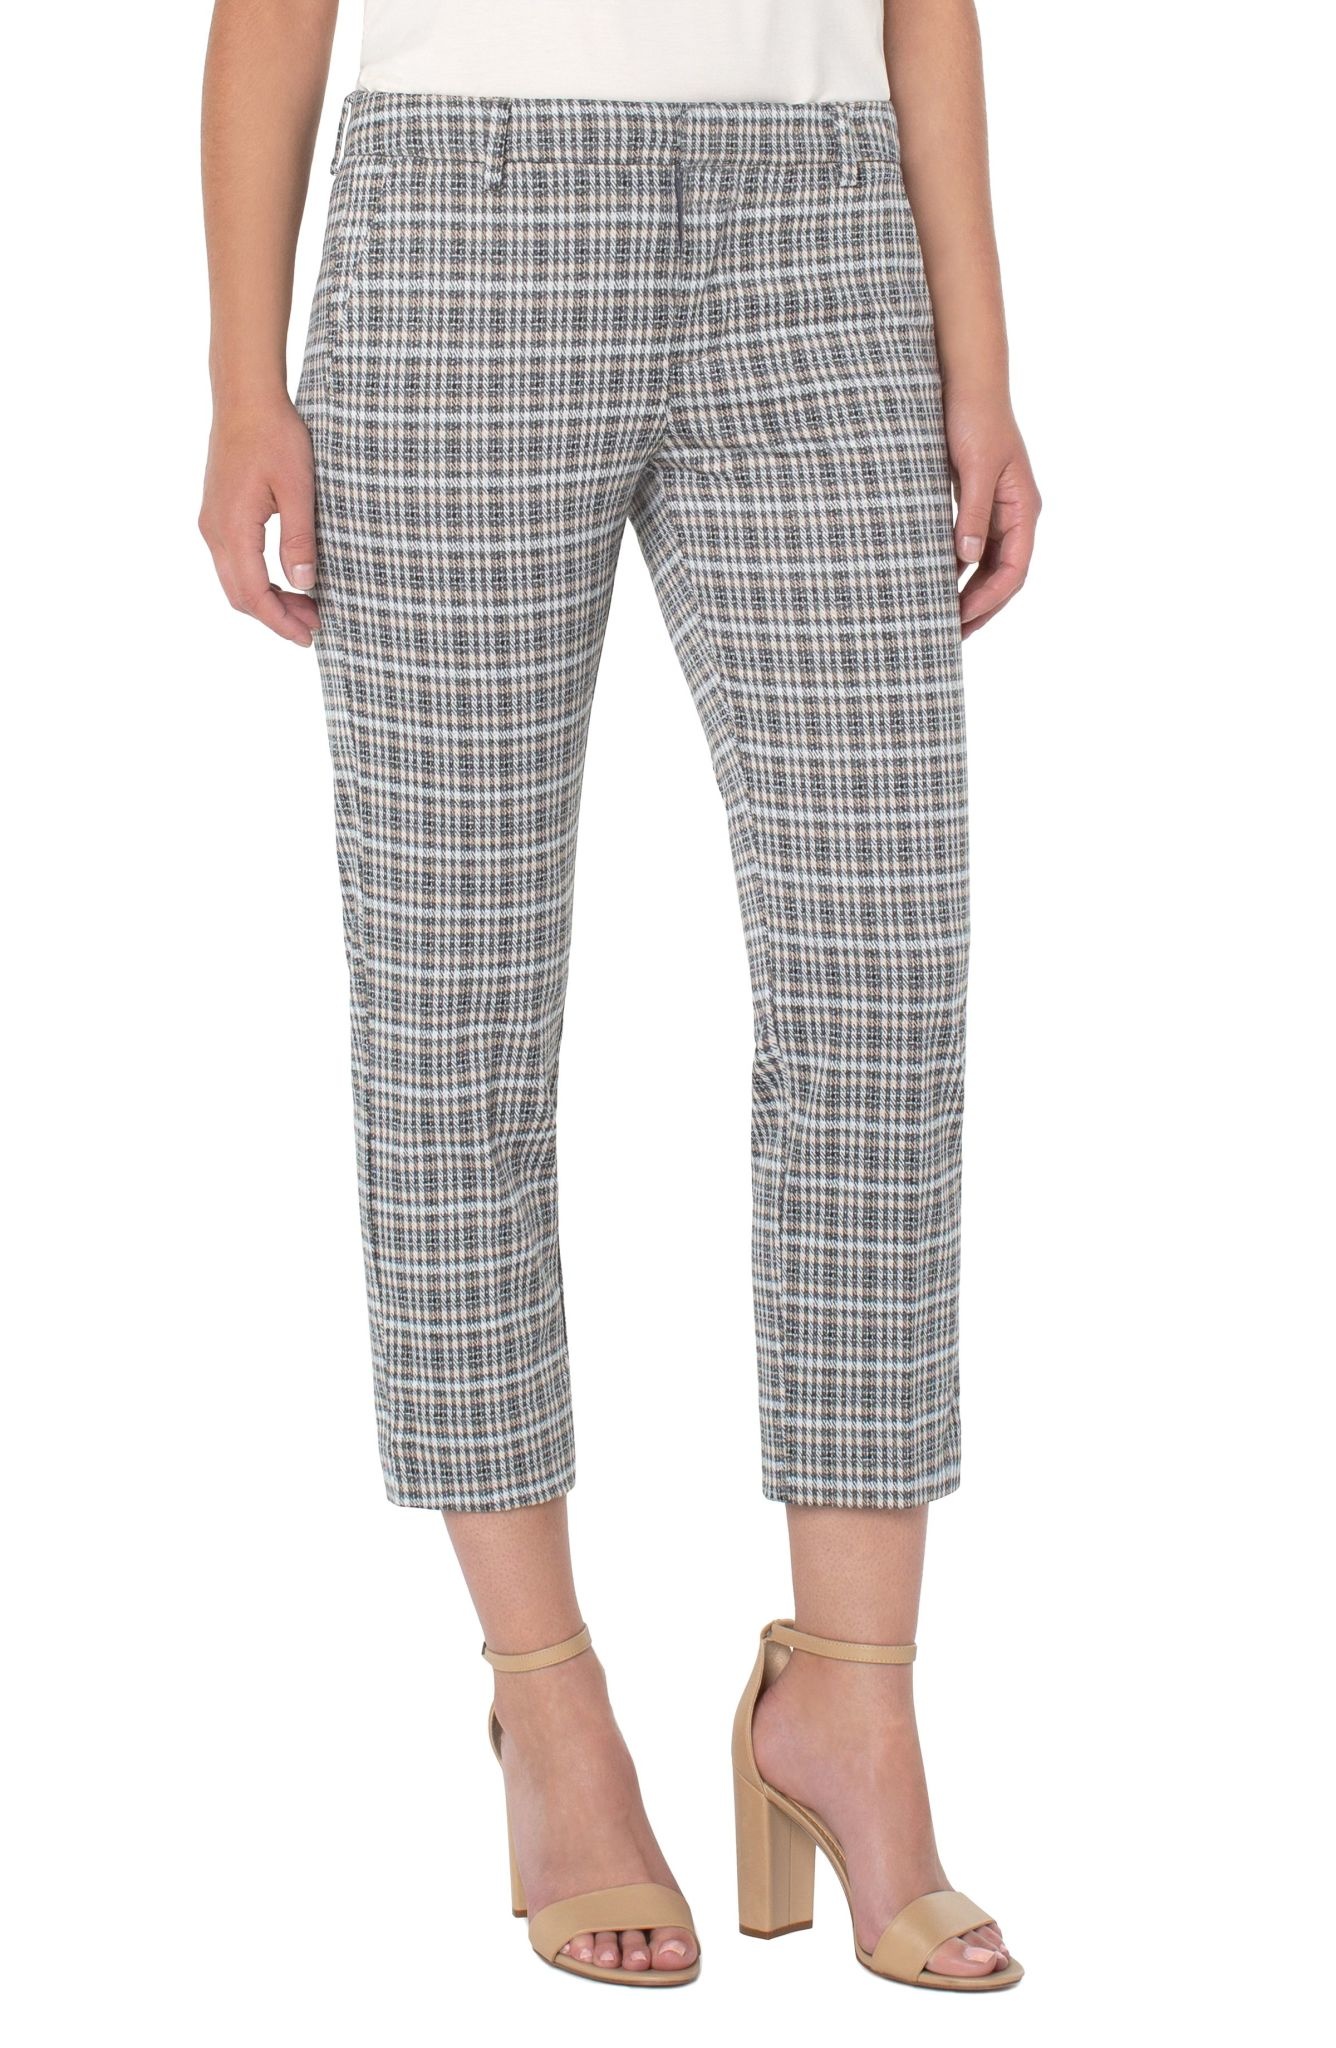 Kelsey Knit Trouser With Slit 25" Inseam